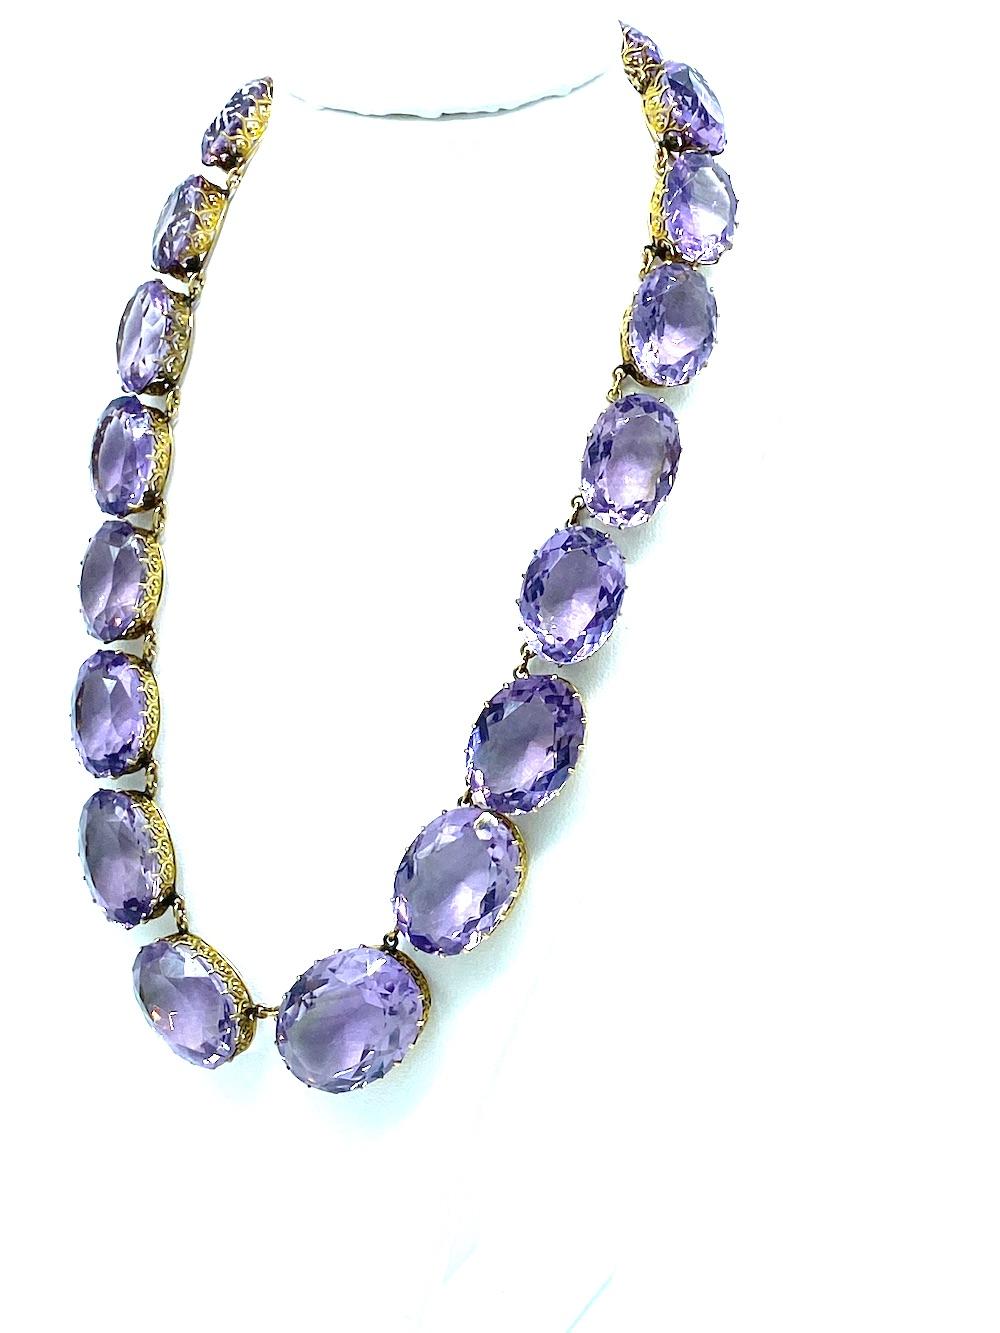 Amethyst 100 Carat Necklace 14 Karat Gold
15 Inch long plus a large 8.32 mm 14 karat gold spring ring clasp,
Blush colored purple amethyst gemstones graduate in size from the largest center stone measuring 21.50 x 16.86 mm.  Each stone is slightly